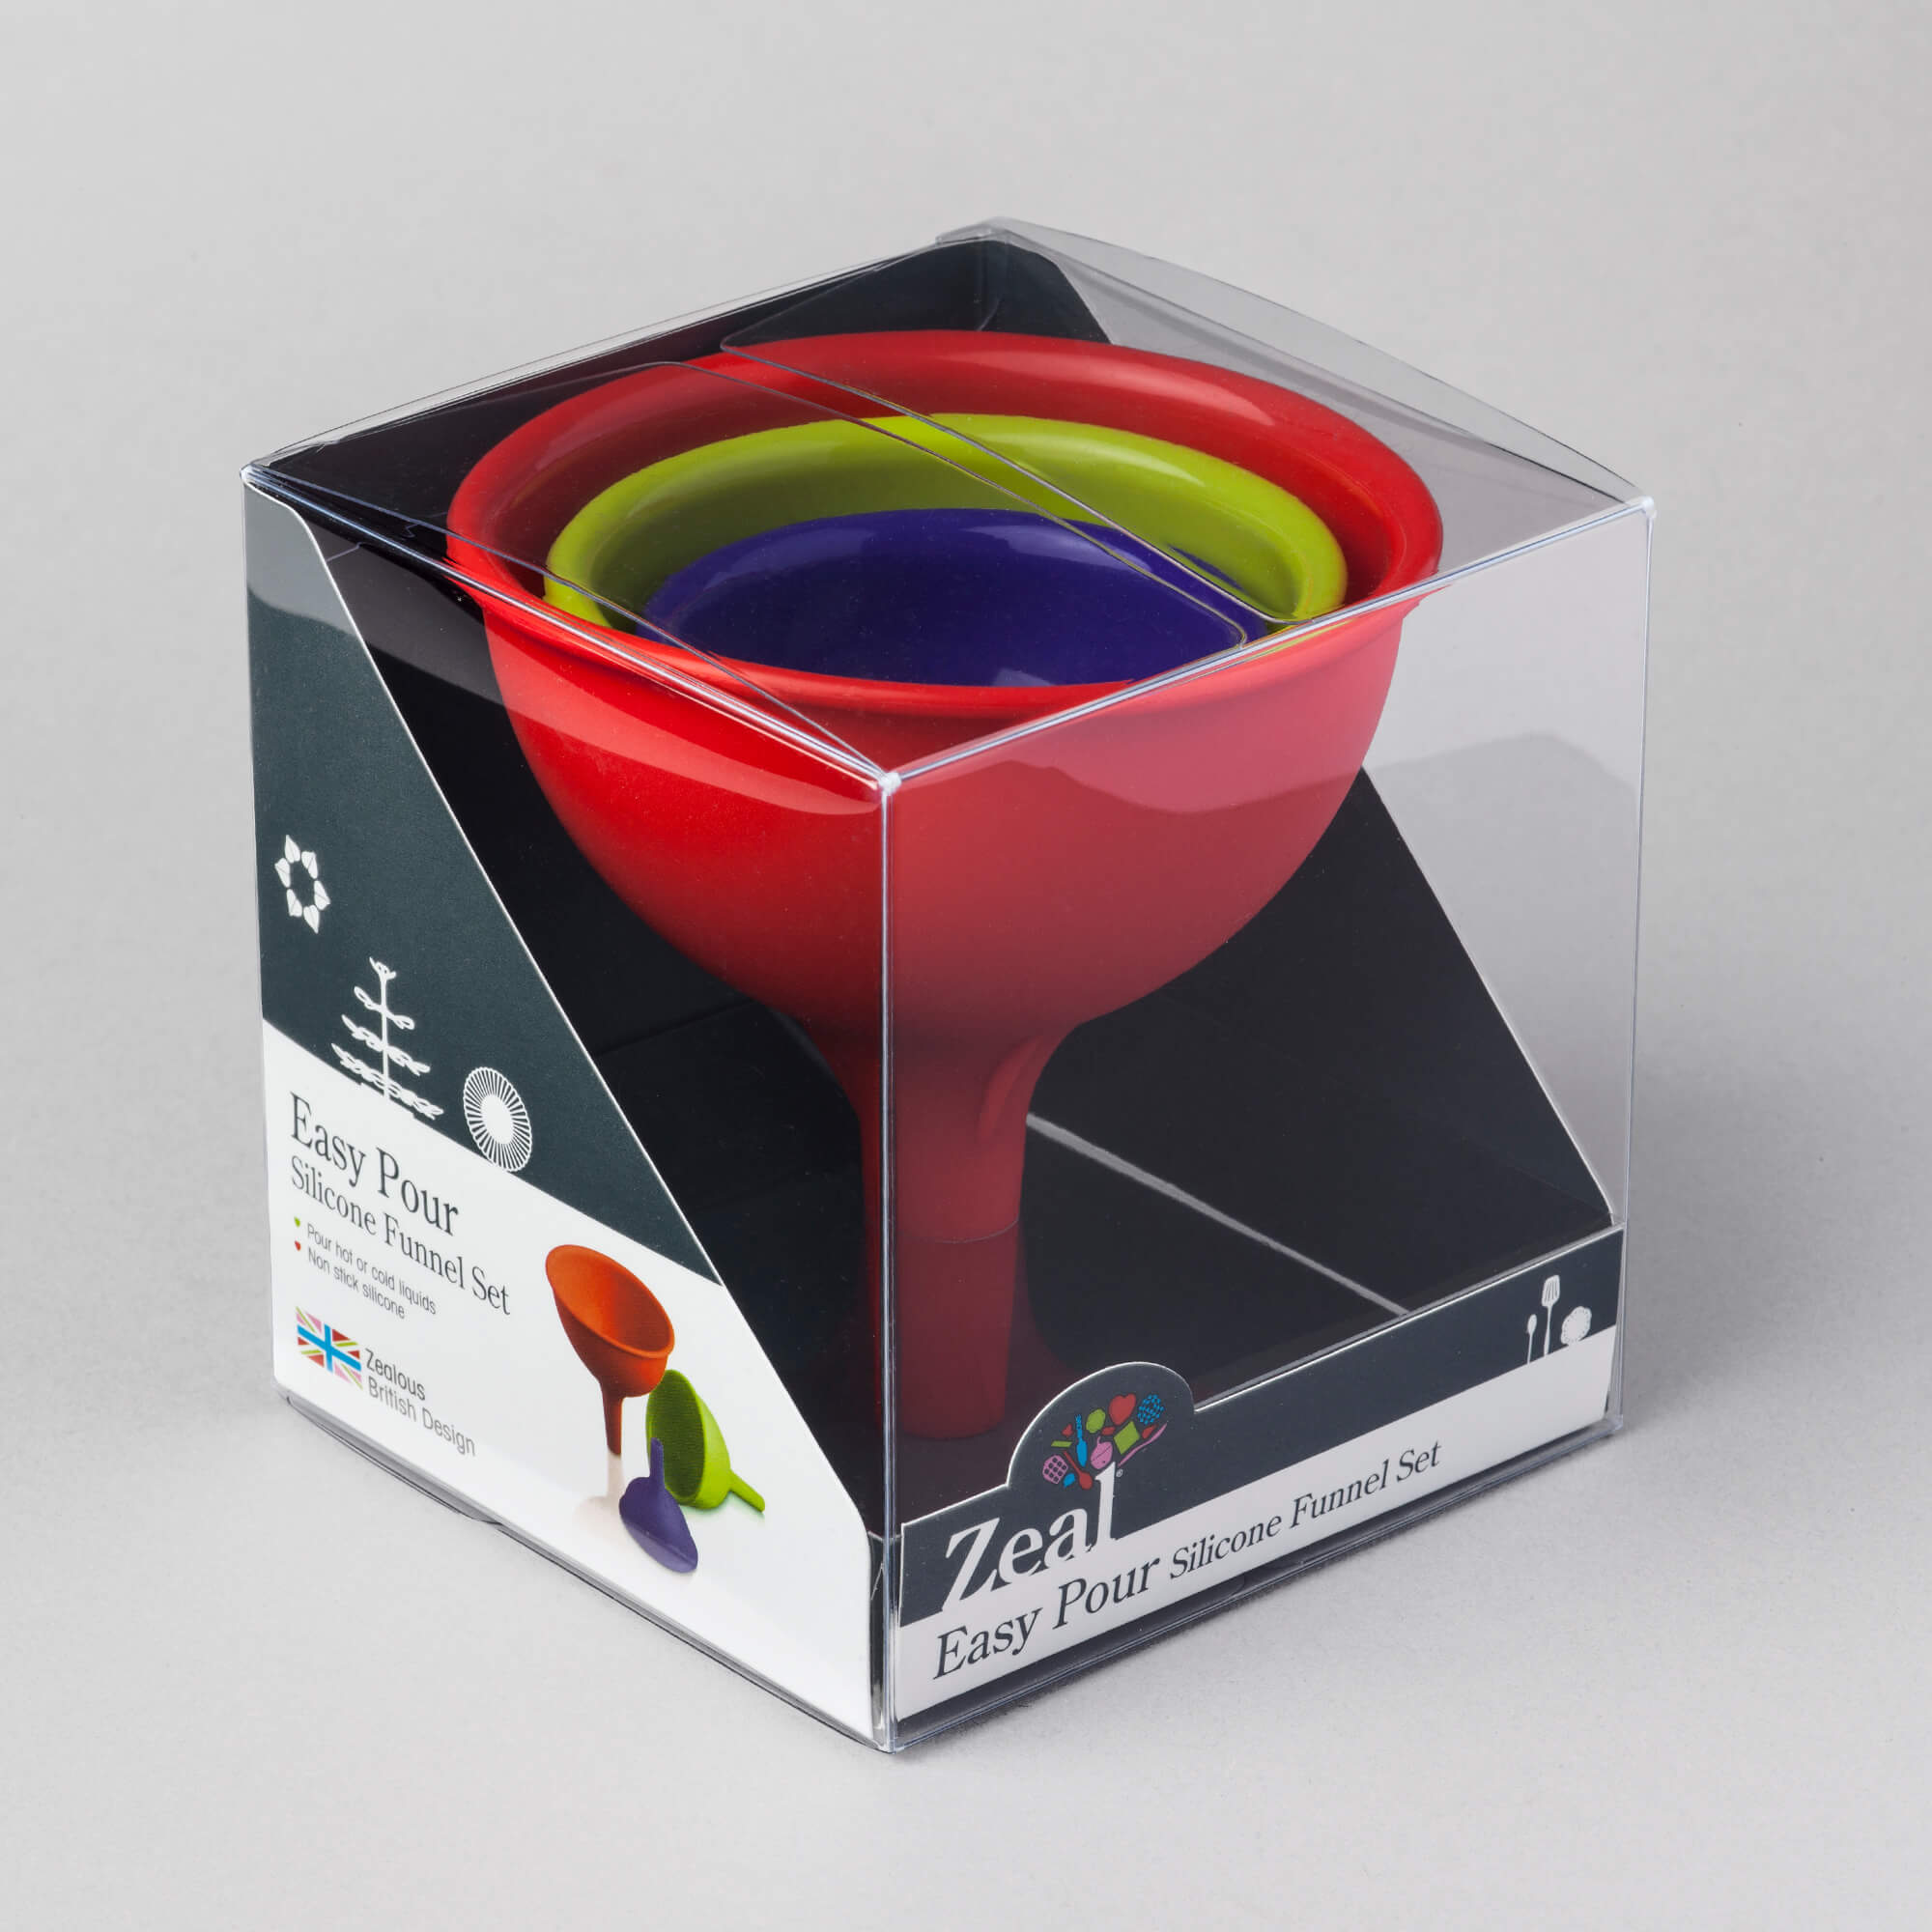 Zeal Set of 3 Silicone Funnels in packaging